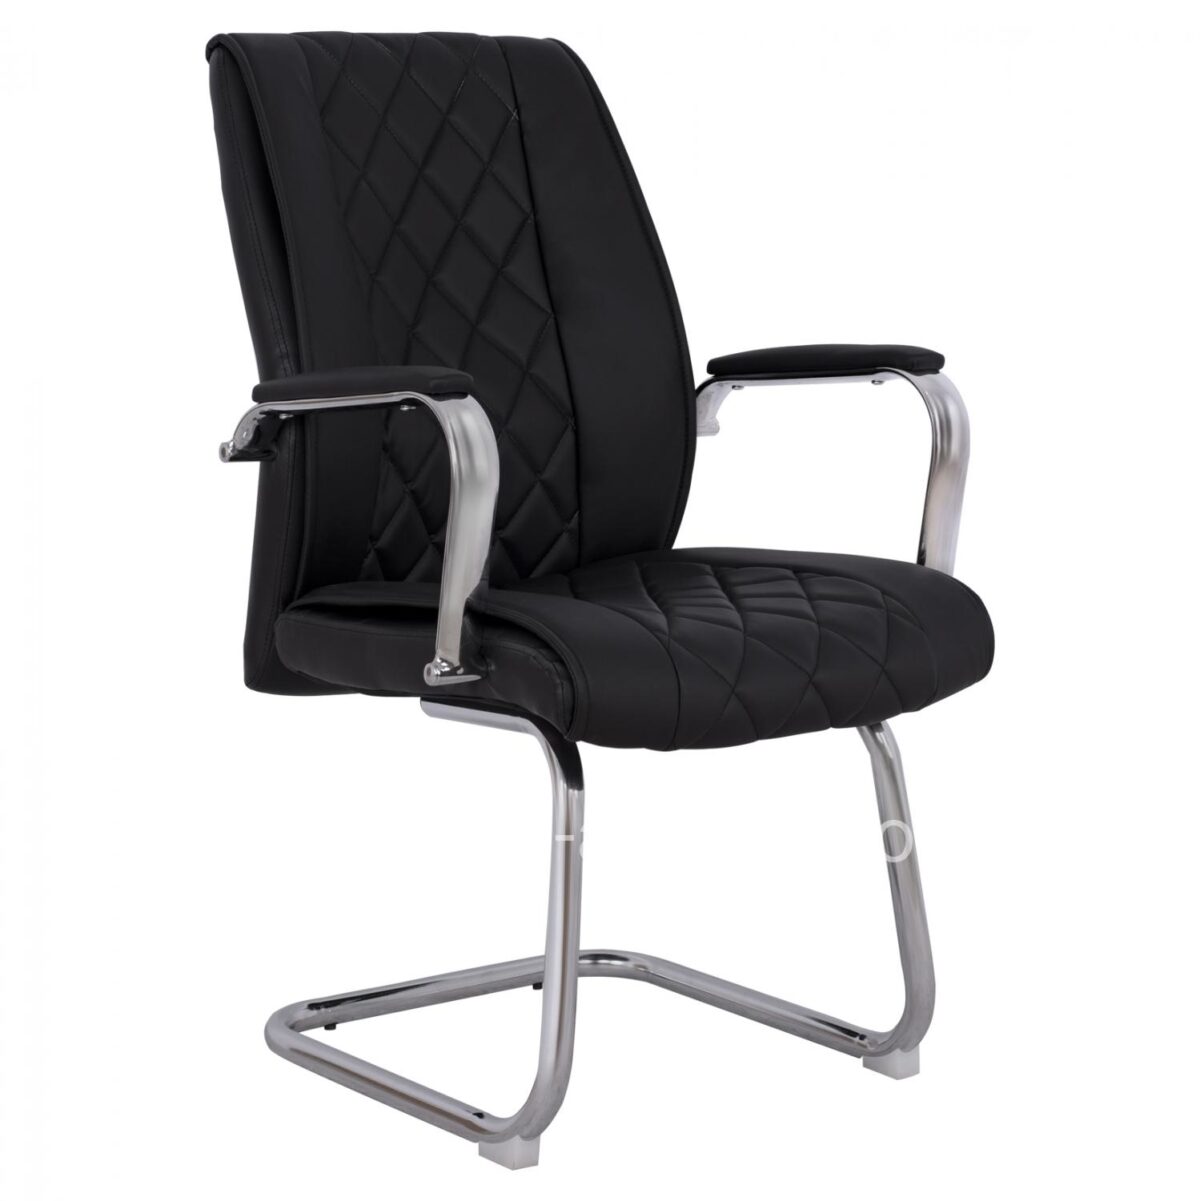 Conference chair HM1105.01 in black color